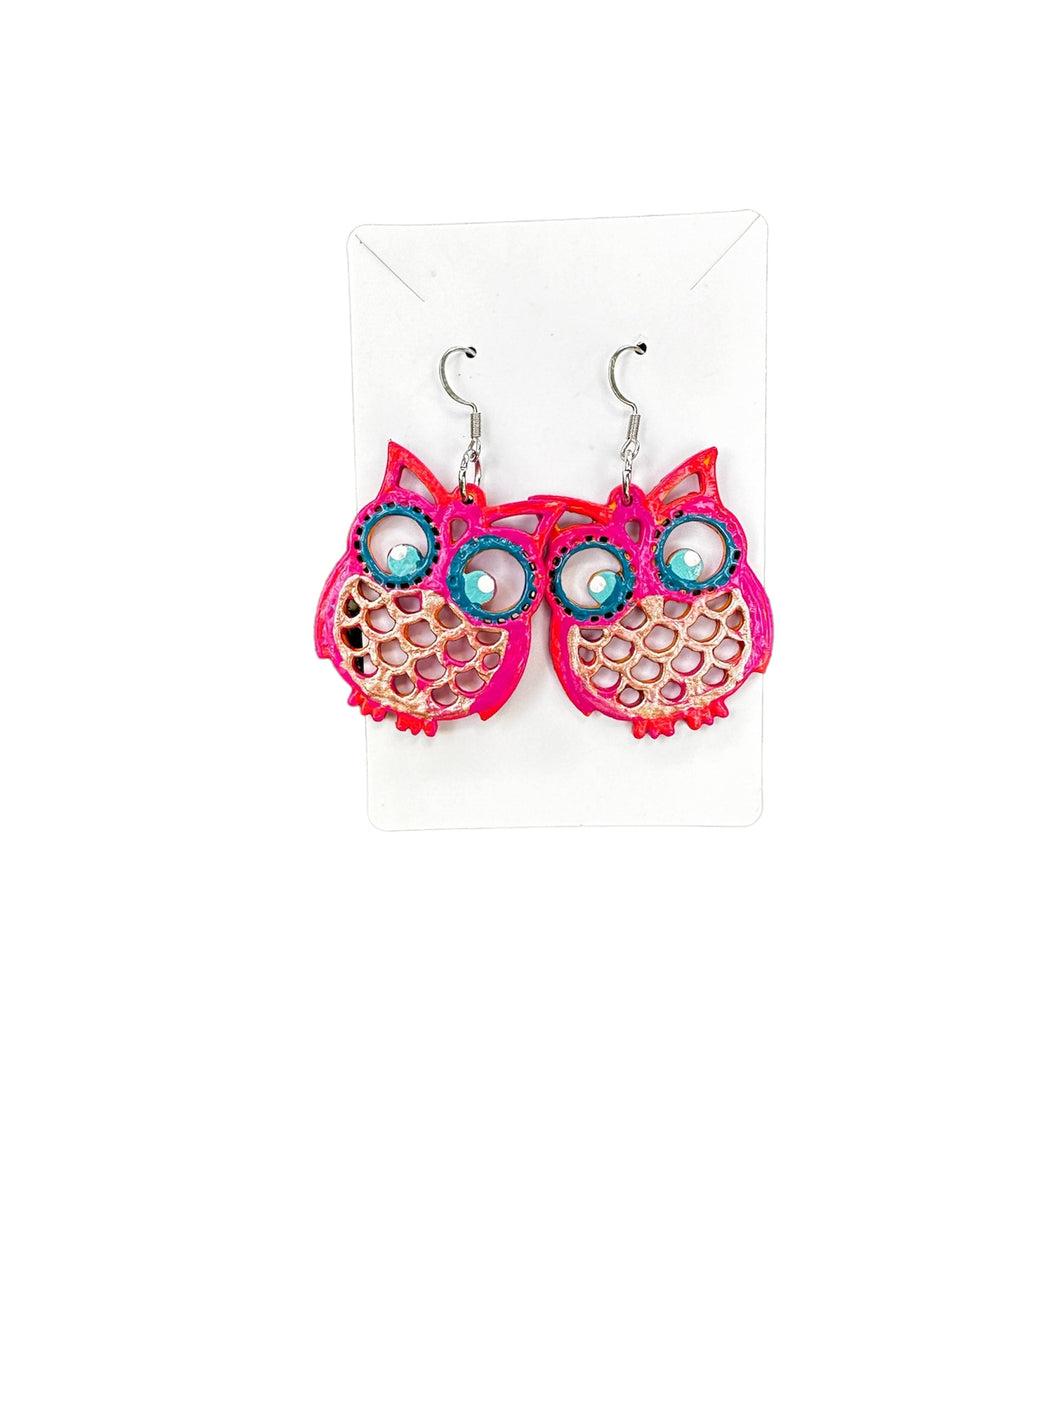 Hand Painted Pink and Blue Owl Earrings